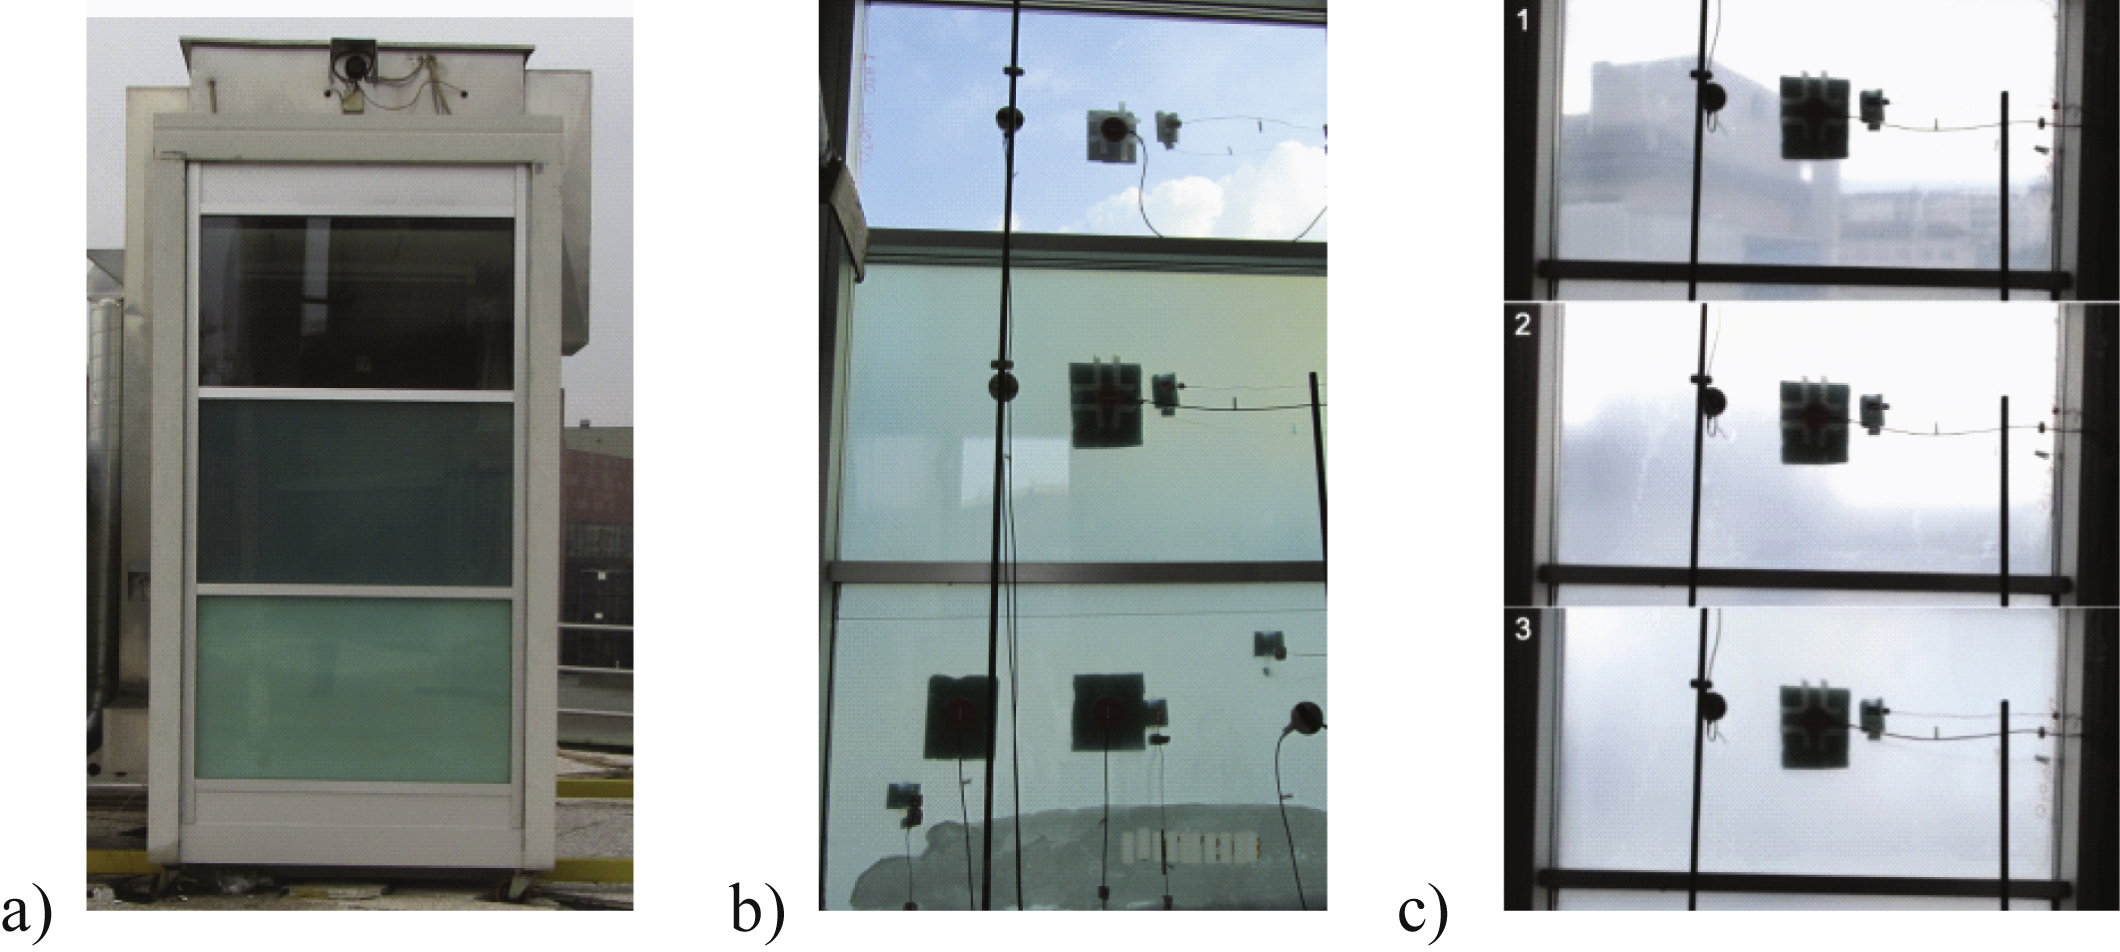 Prototypes installed in the test cell (a), PCMs partially melted in the lower glazing (b) and different transmittance of the thermotropic layer (c).